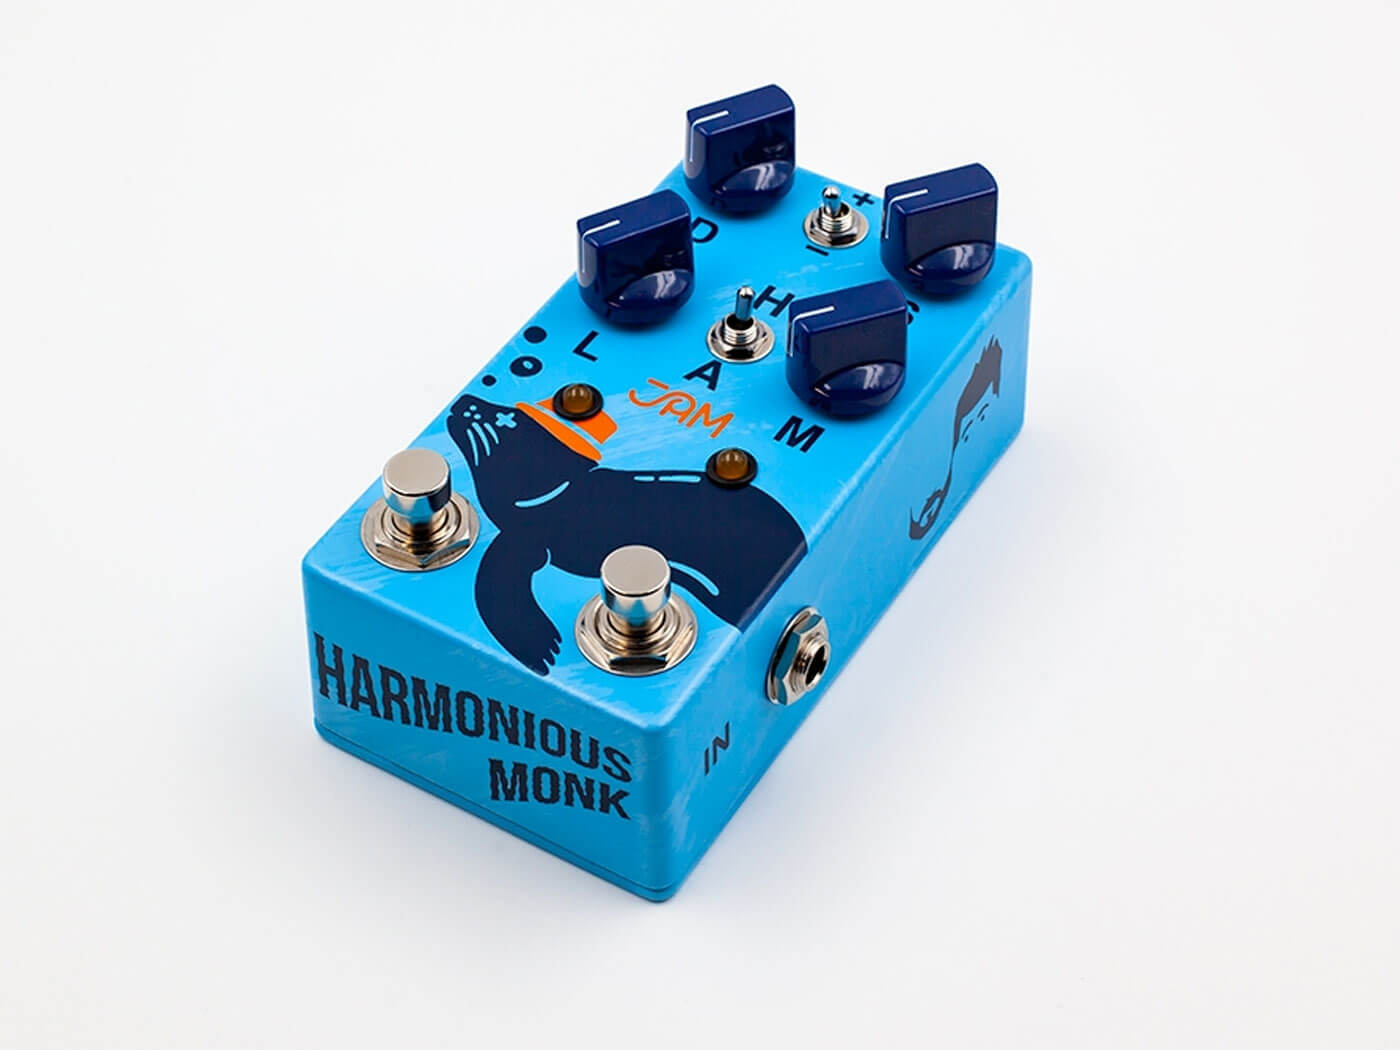 Jam Pedals and That Pedal Show's Harmonious Monk